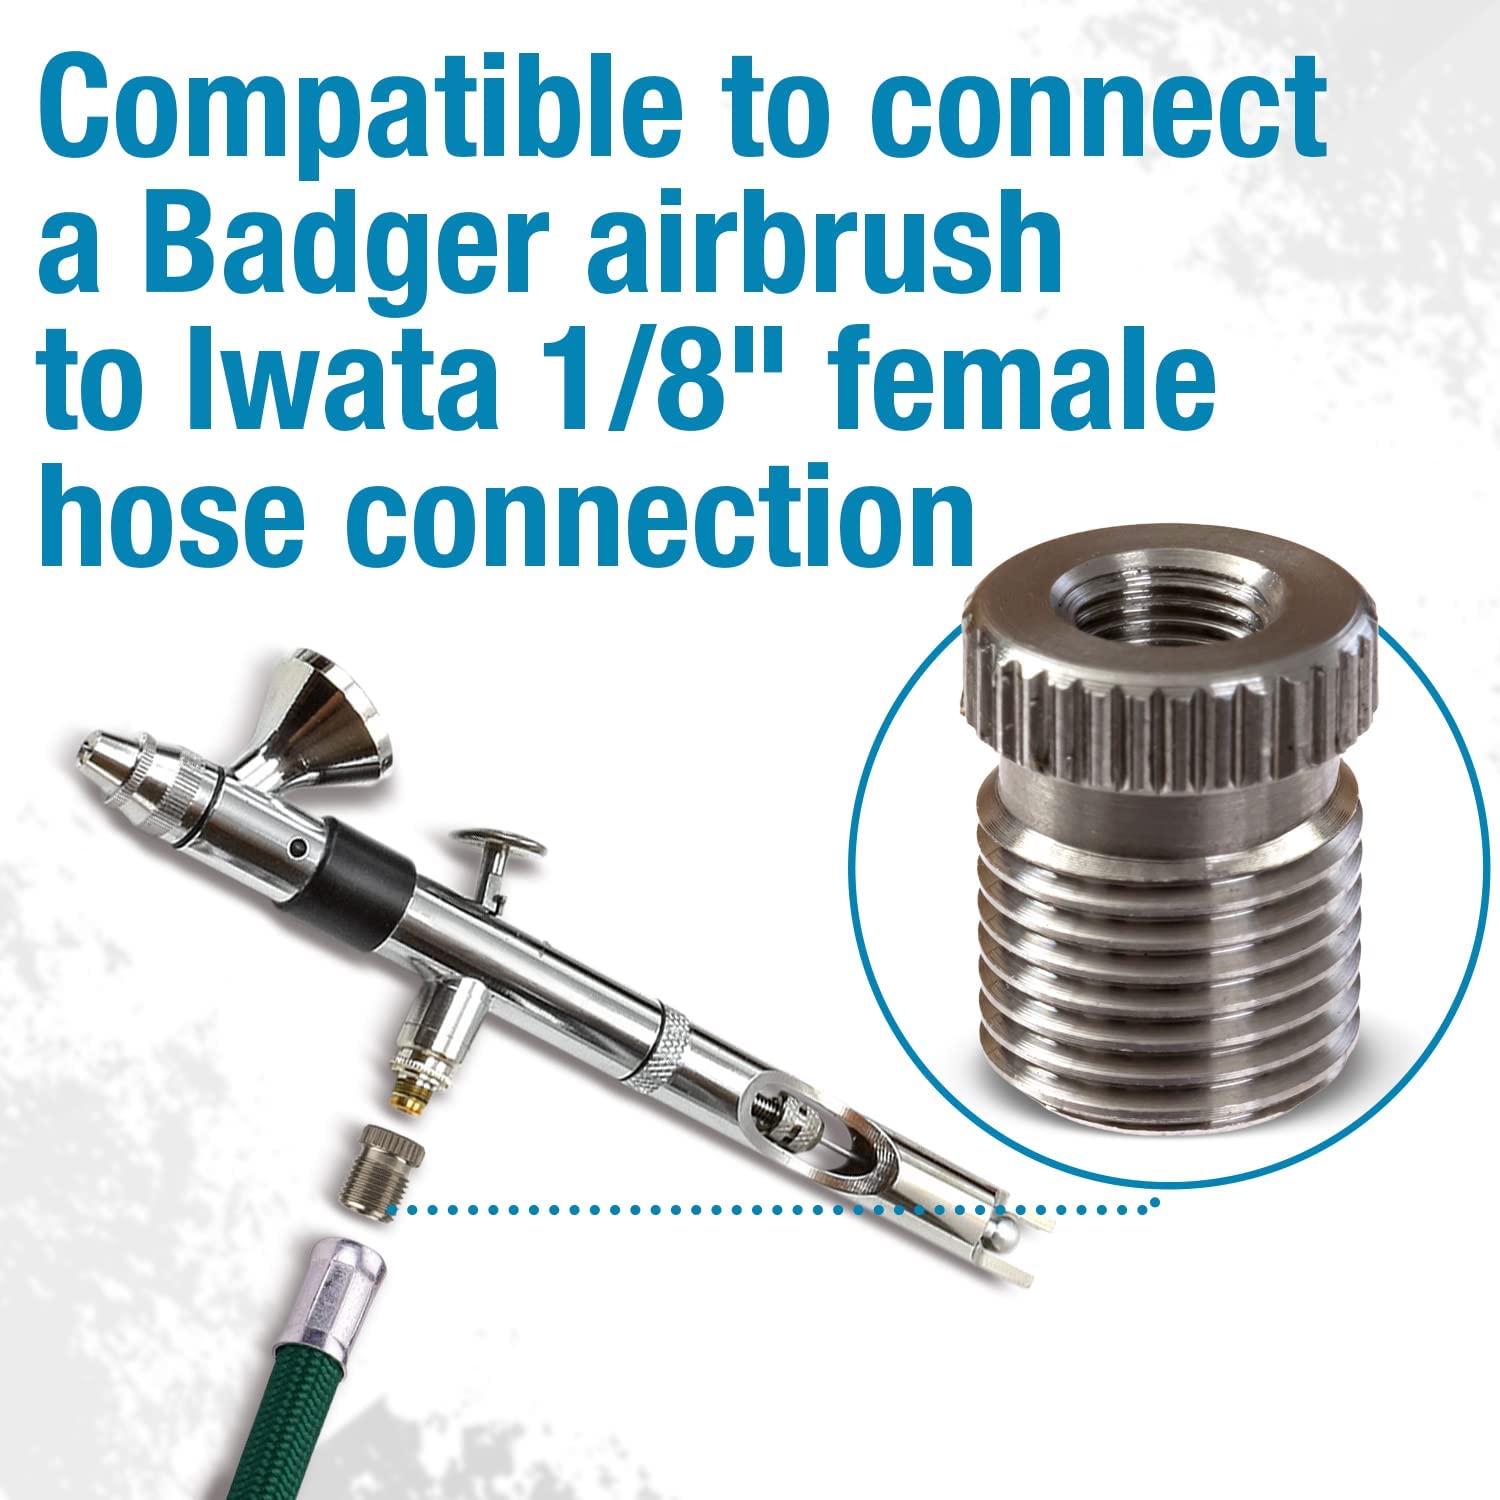 Badger airbrush adapter to 1/8 hose